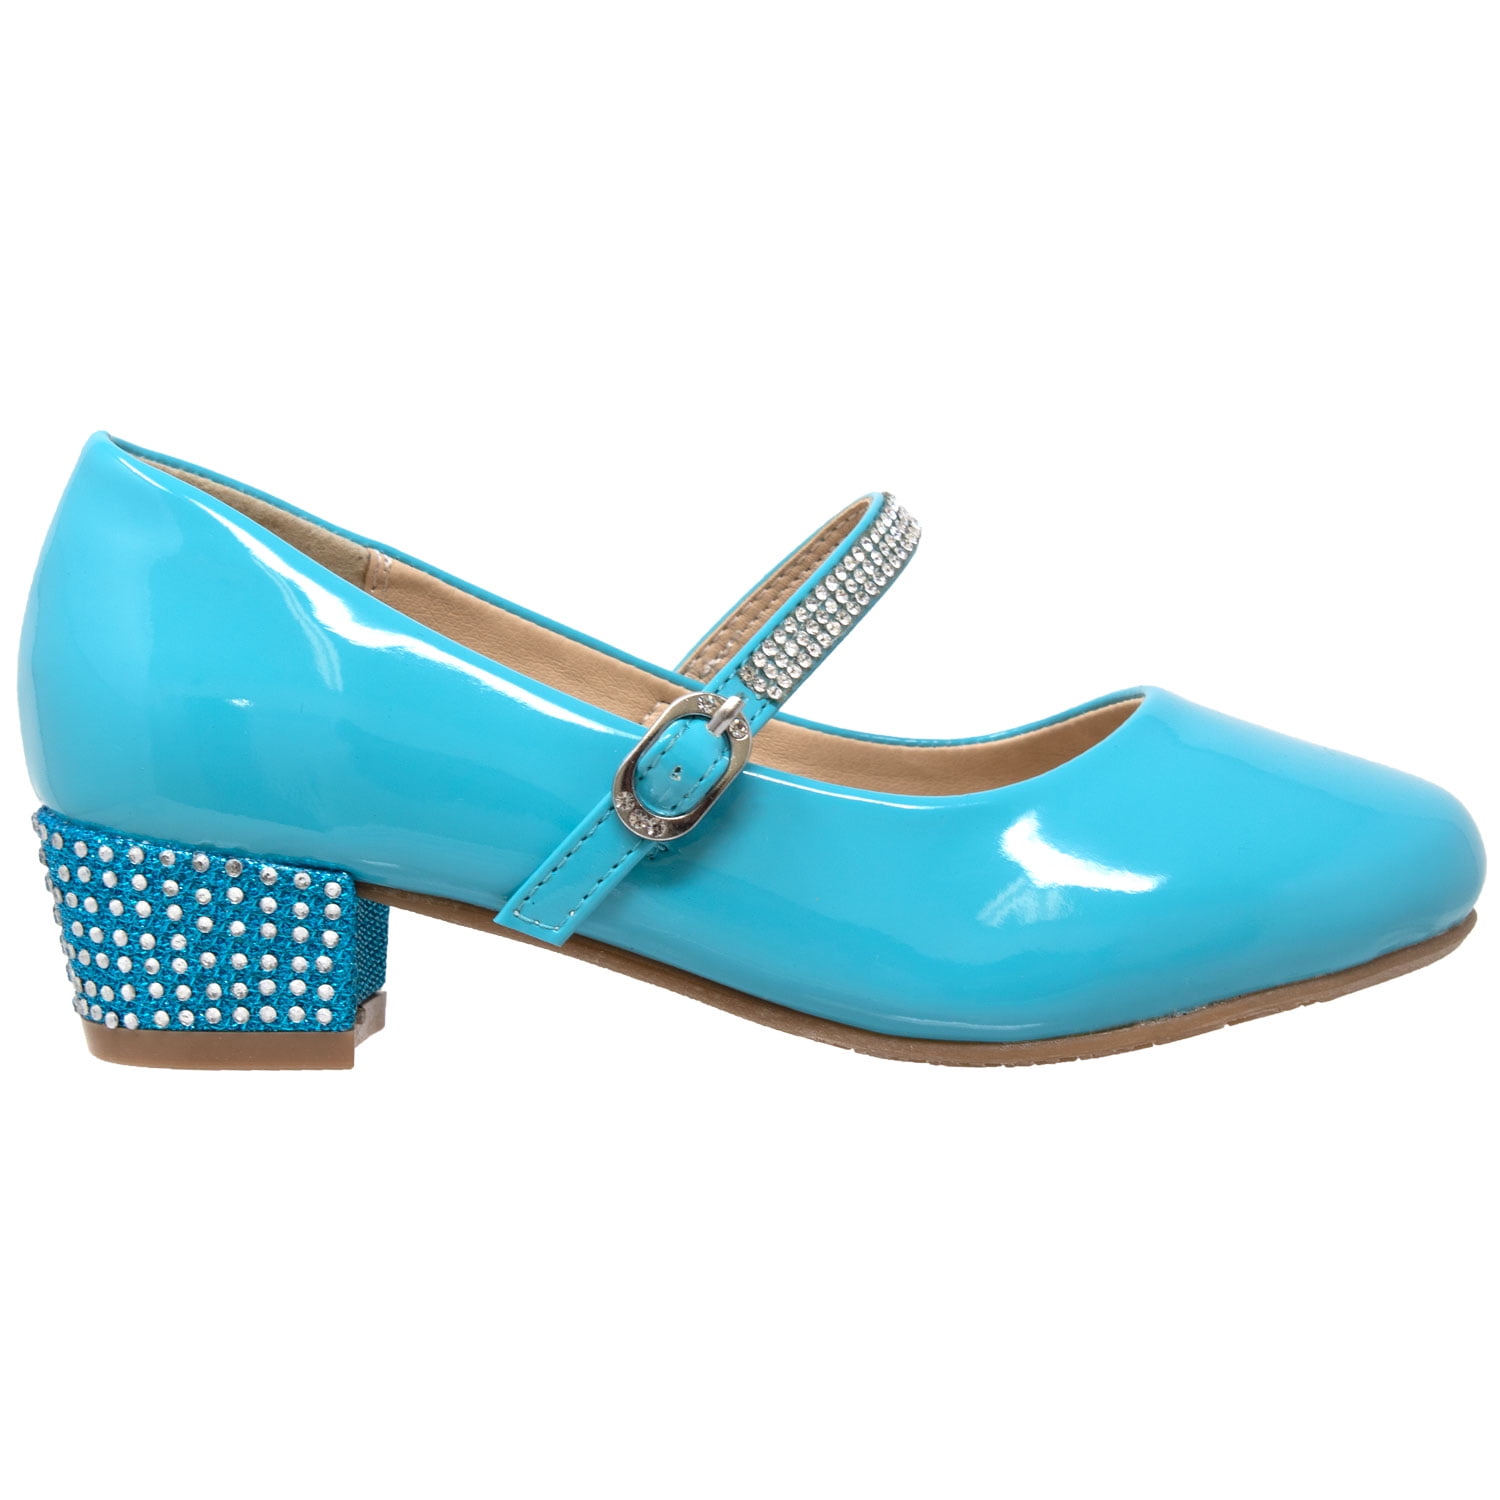 Details about   Women Round Toe Tapered Heel Ankle Strap Retro Mary Janes Casual Shoes Fashion 